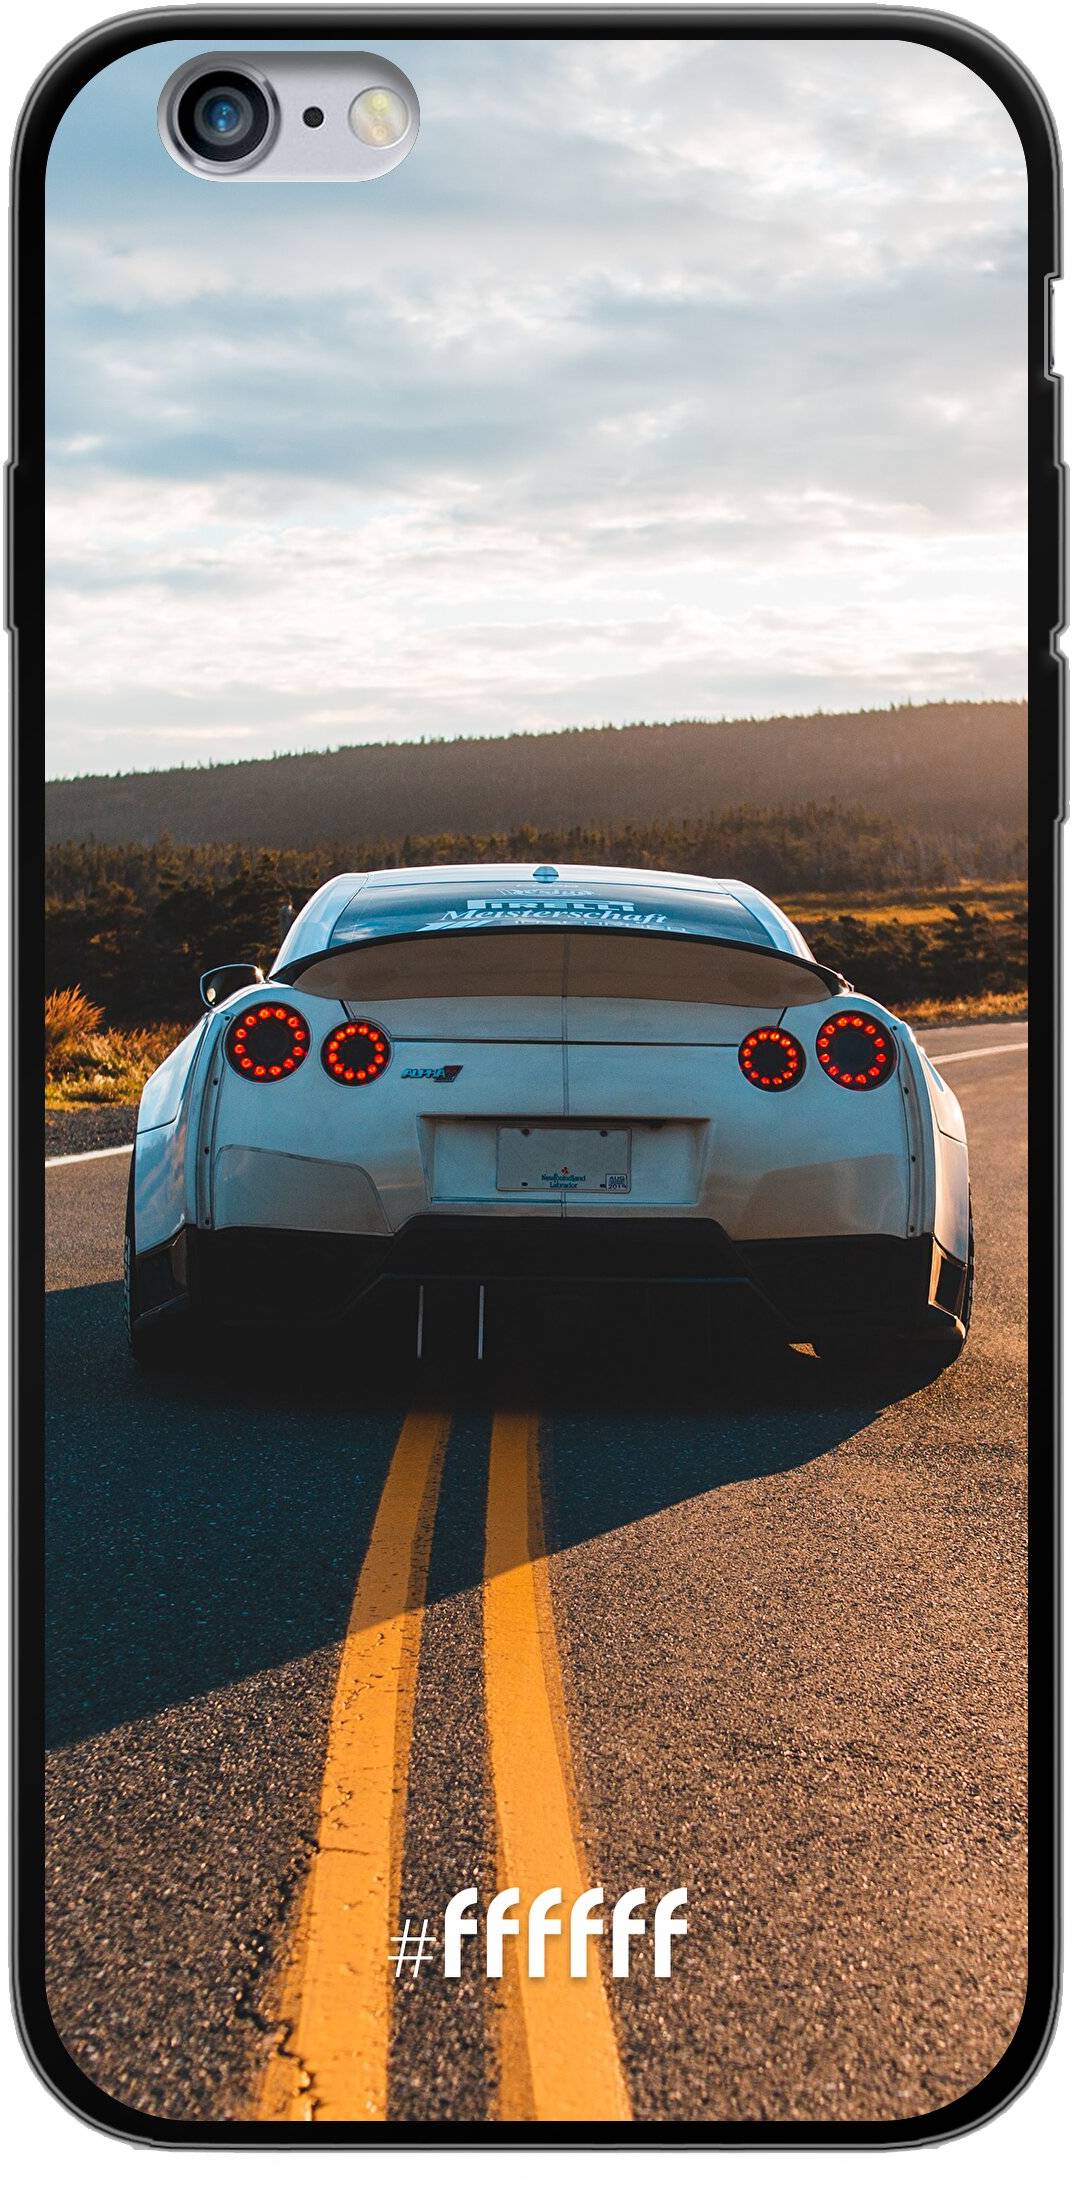 Silver Sports Car iPhone 6s